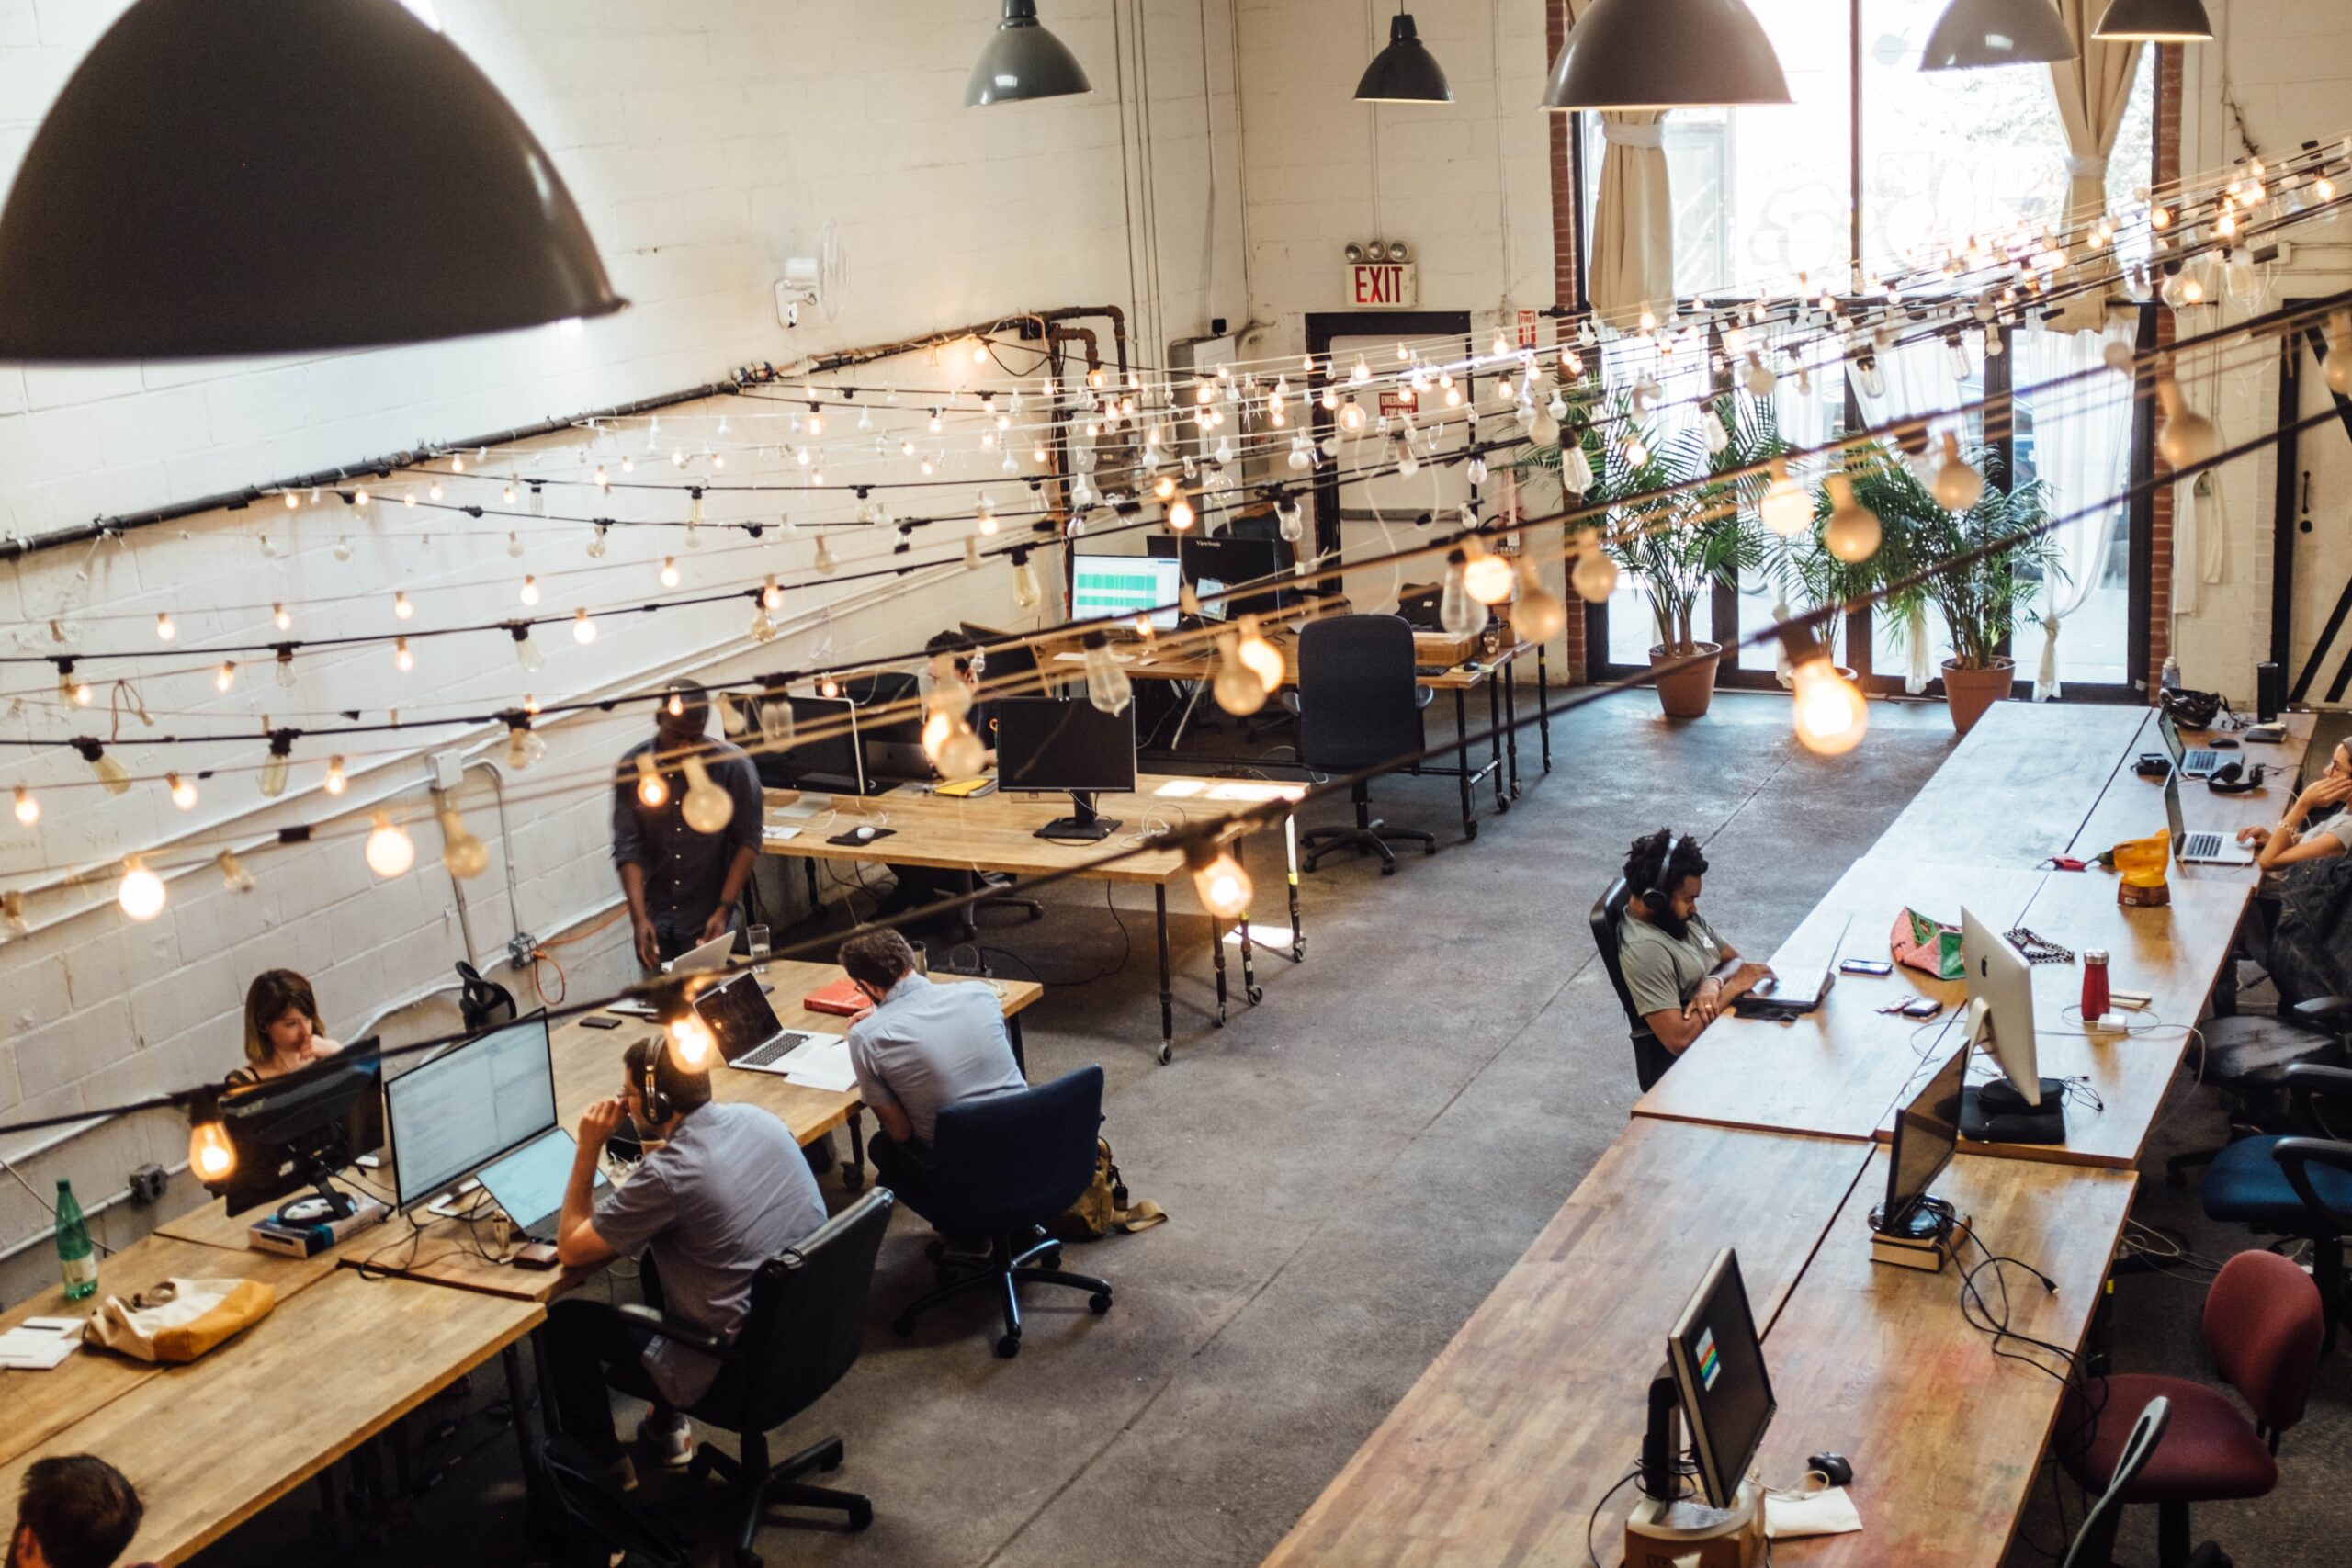 Coworking spaces around the world